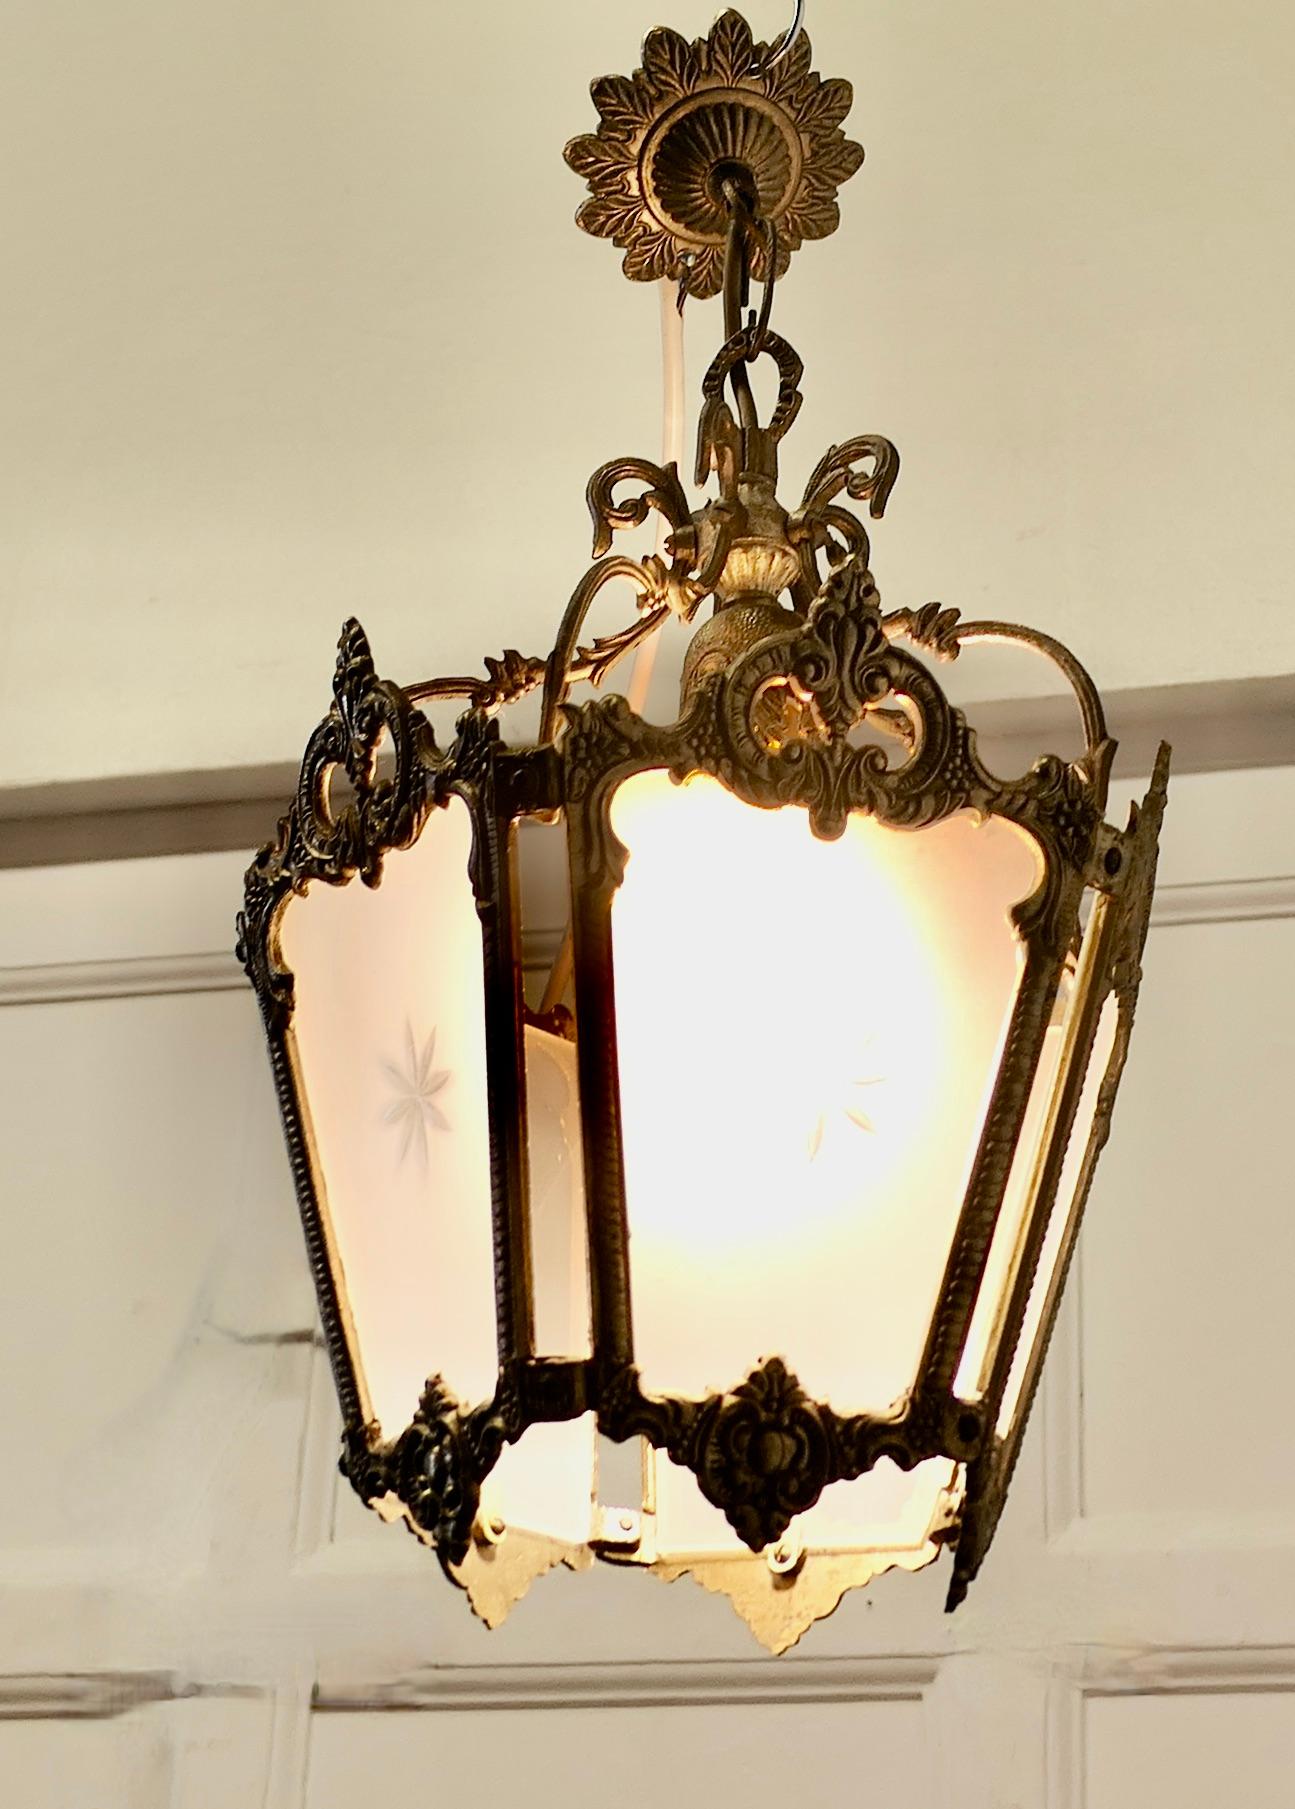 Decorative French Gilt Brass Lantern Pendant Light

A superb quality brass lantern, the light has 6 glass panels each etched with a star at the centre. The Lamp is decorated in the French style with leaves and it hangs from a short chain on a brass